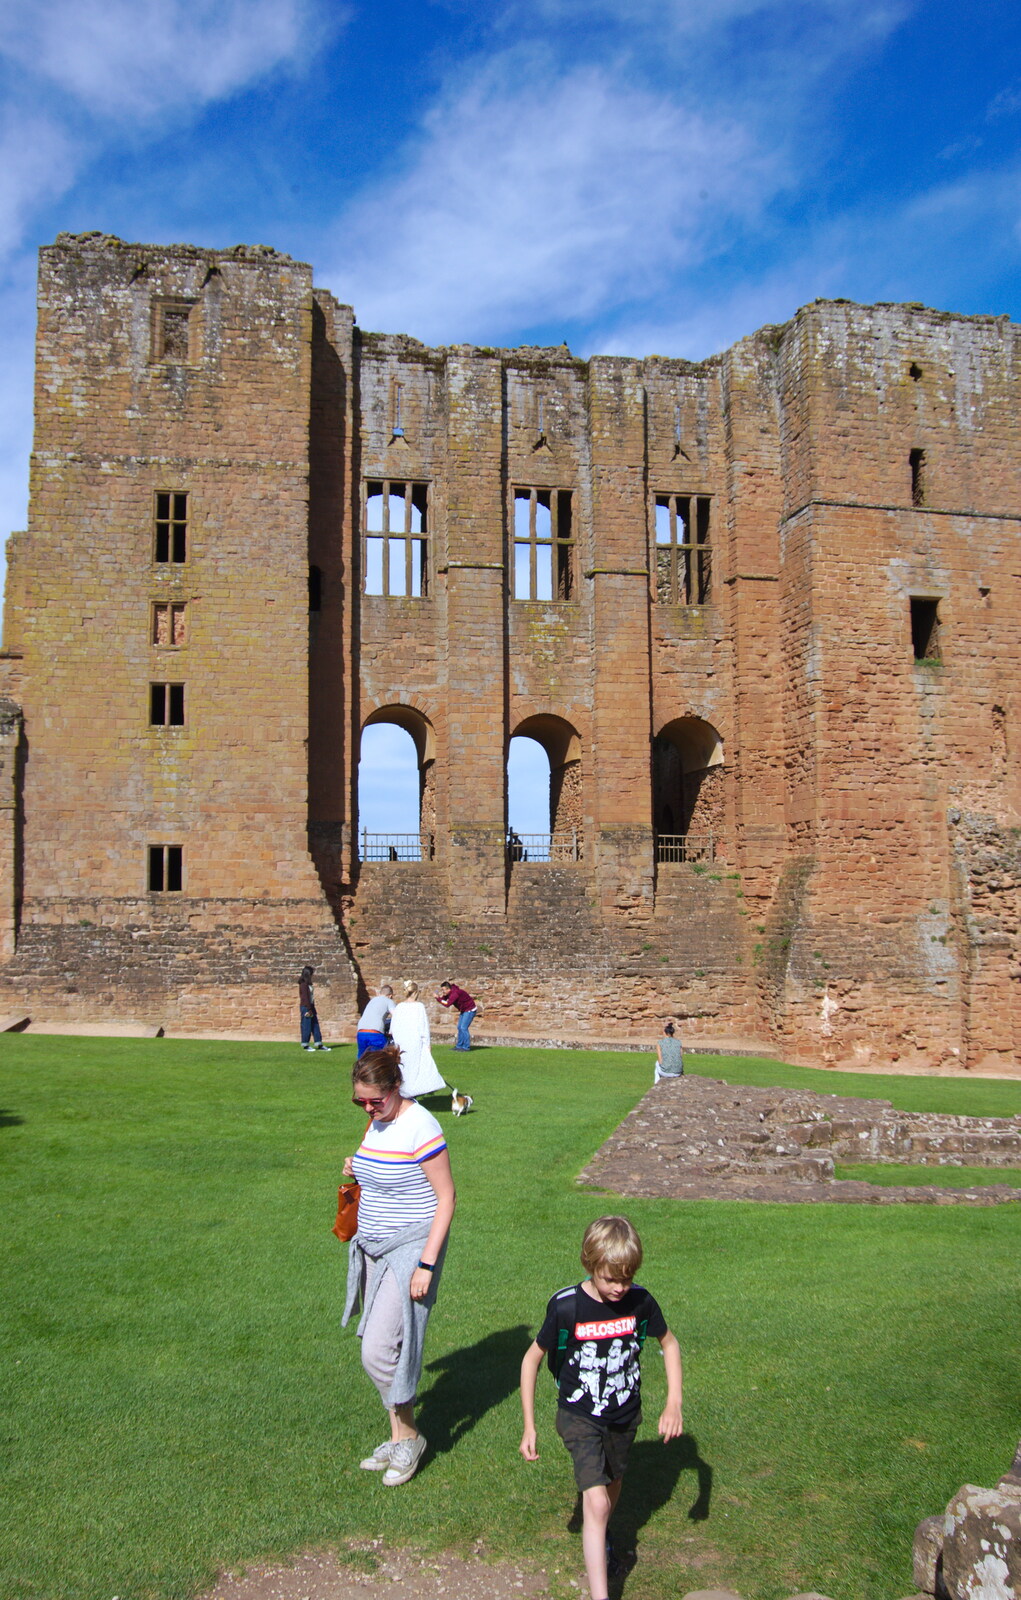 Isobel and Harry roam around in front of the older keep from Kenilworth Castle and the 69th Entry Reunion Dinner, Stratford, Warwickshire - 14th September 2019